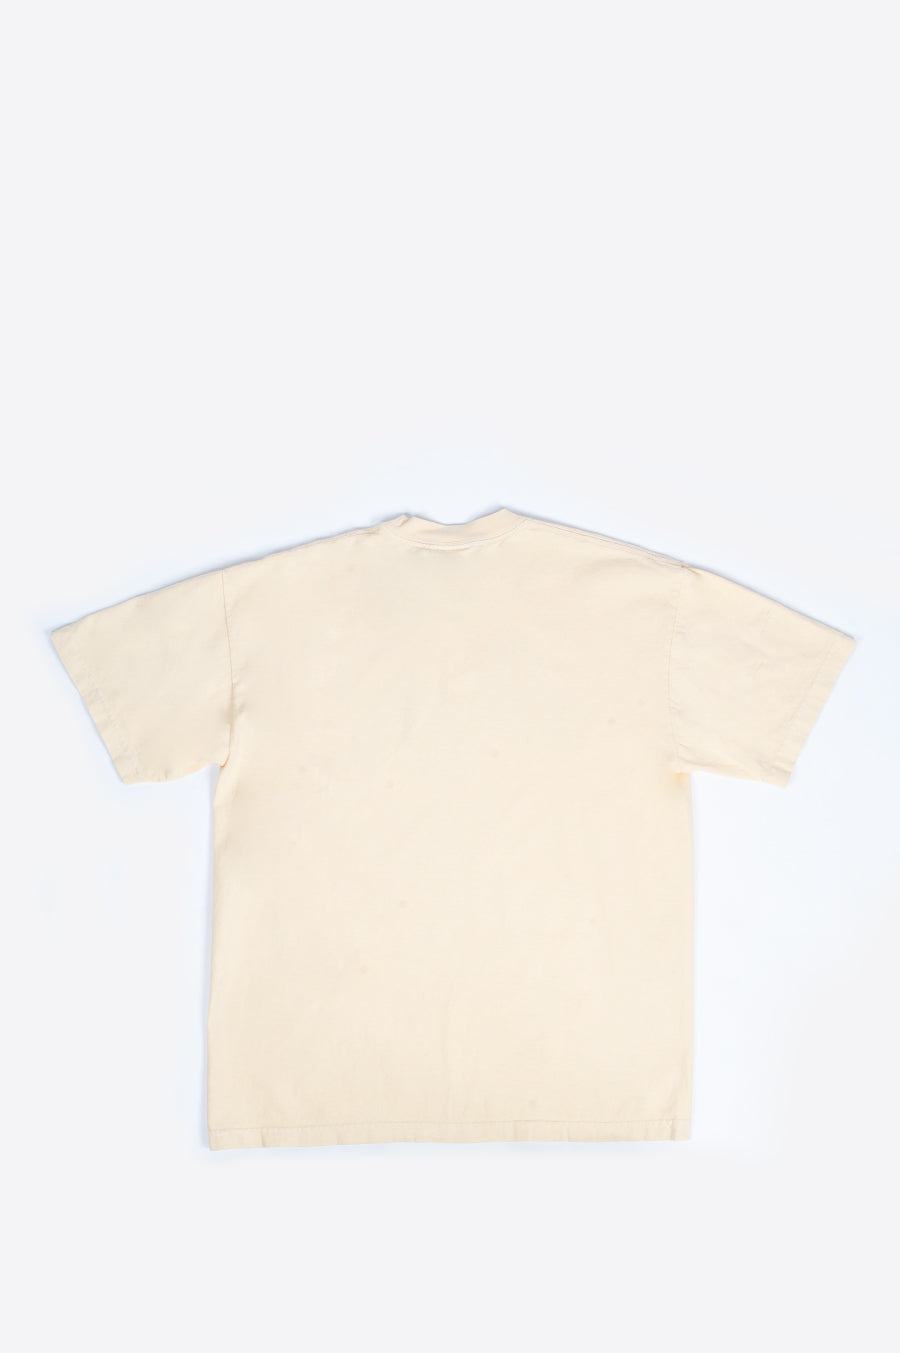 SPORTY AND RICH WELLNESS T-SHIRT IVY